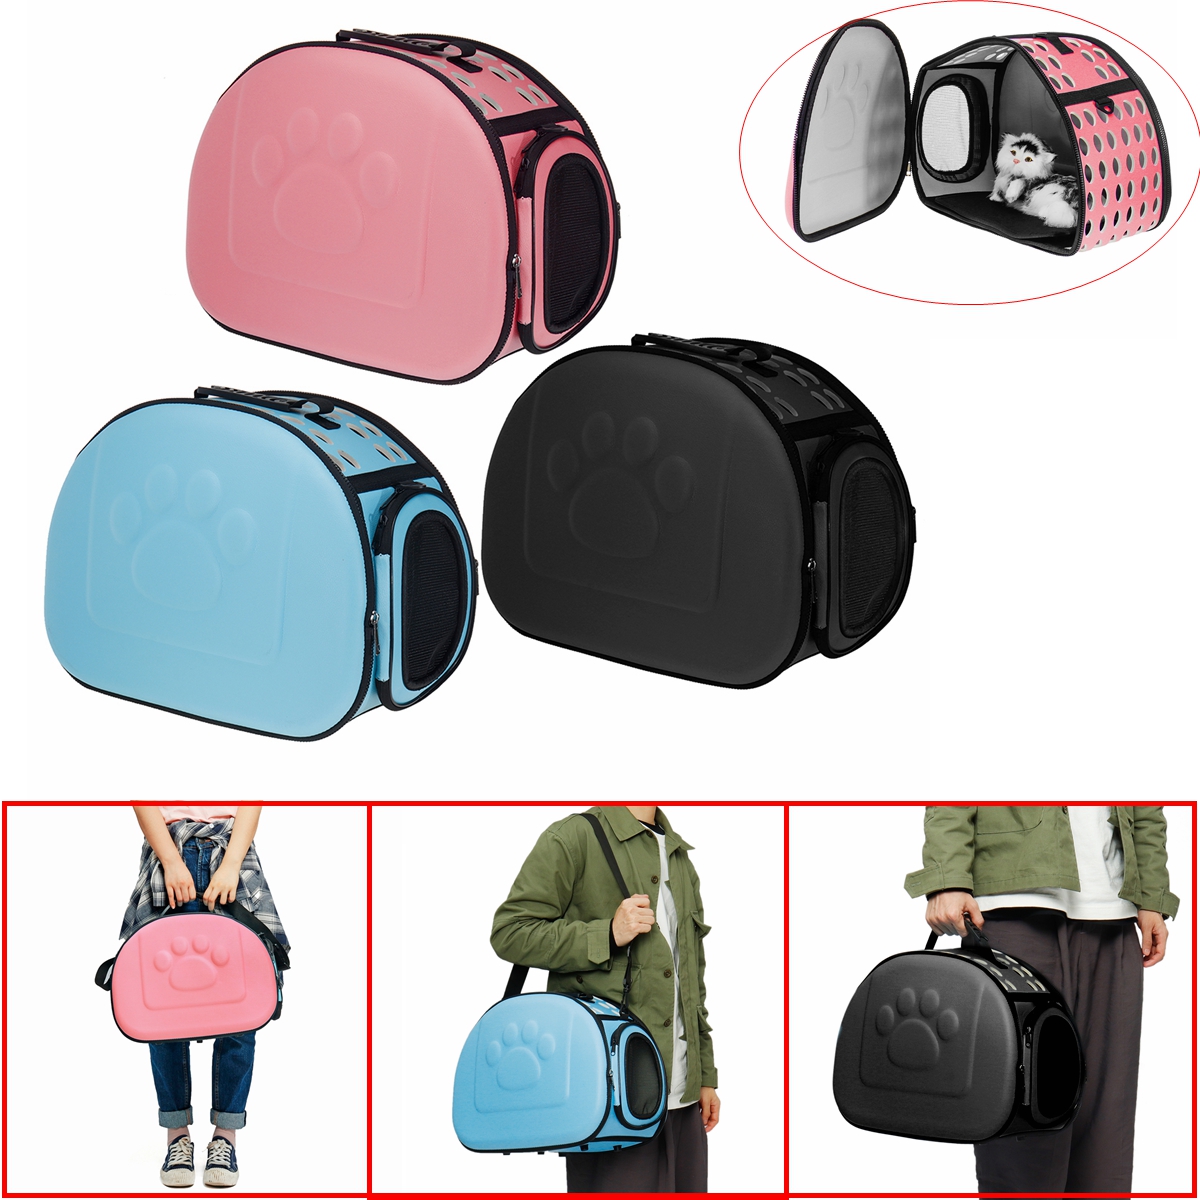 

Portable Pet Dog Cat Puppy Handbag Portable Travel Carry Carrier Tote Cage Bag Crate Box Holder